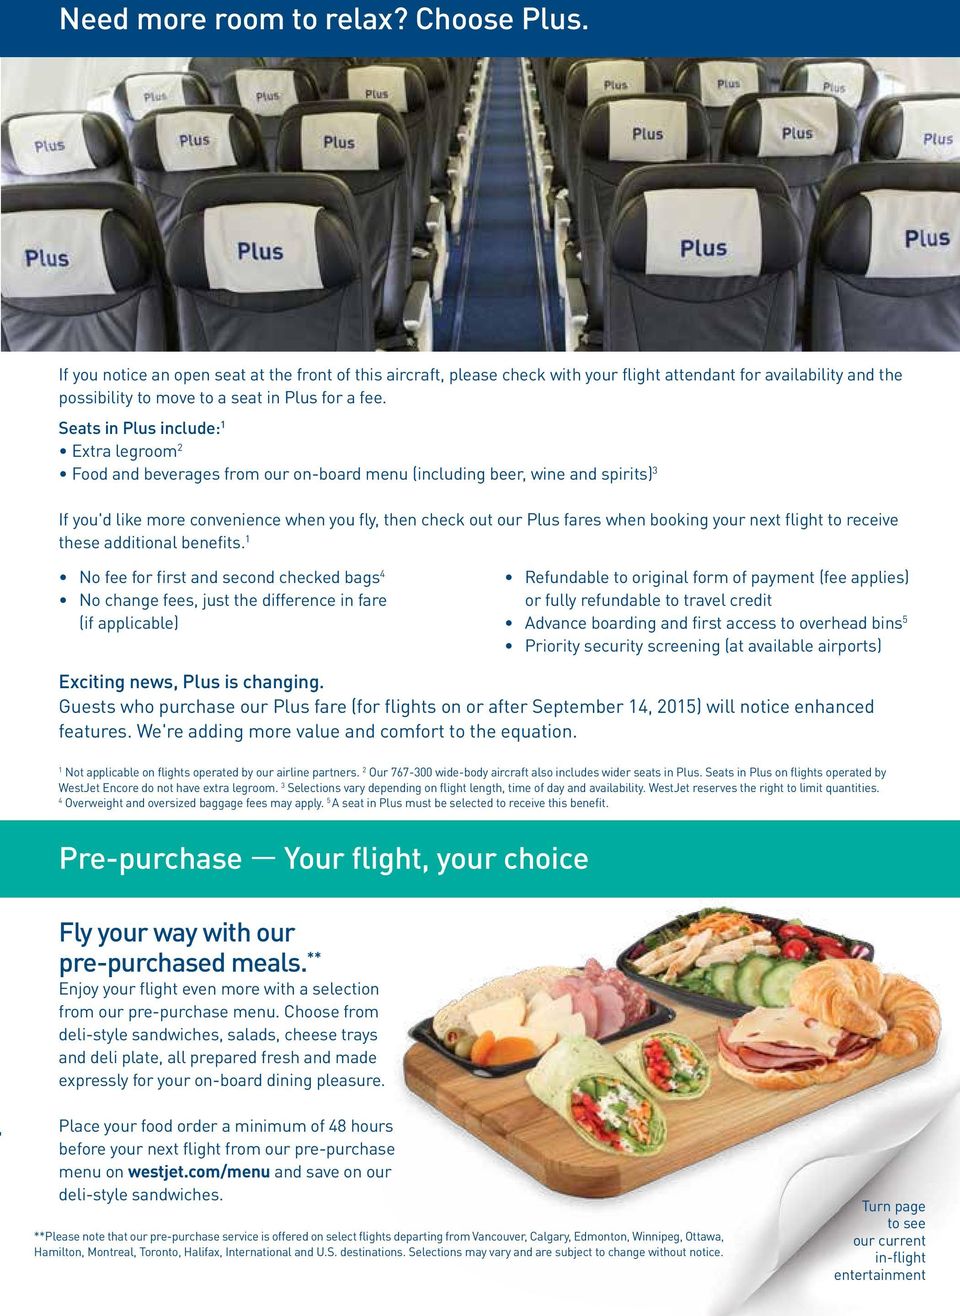 Seats in Plus include: 1 Extra legroom 2 Food and beverages from our on-board menu (including beer, wine and spirits) 3 If you'd like more convenience when you fly, then check out our Plus fares when